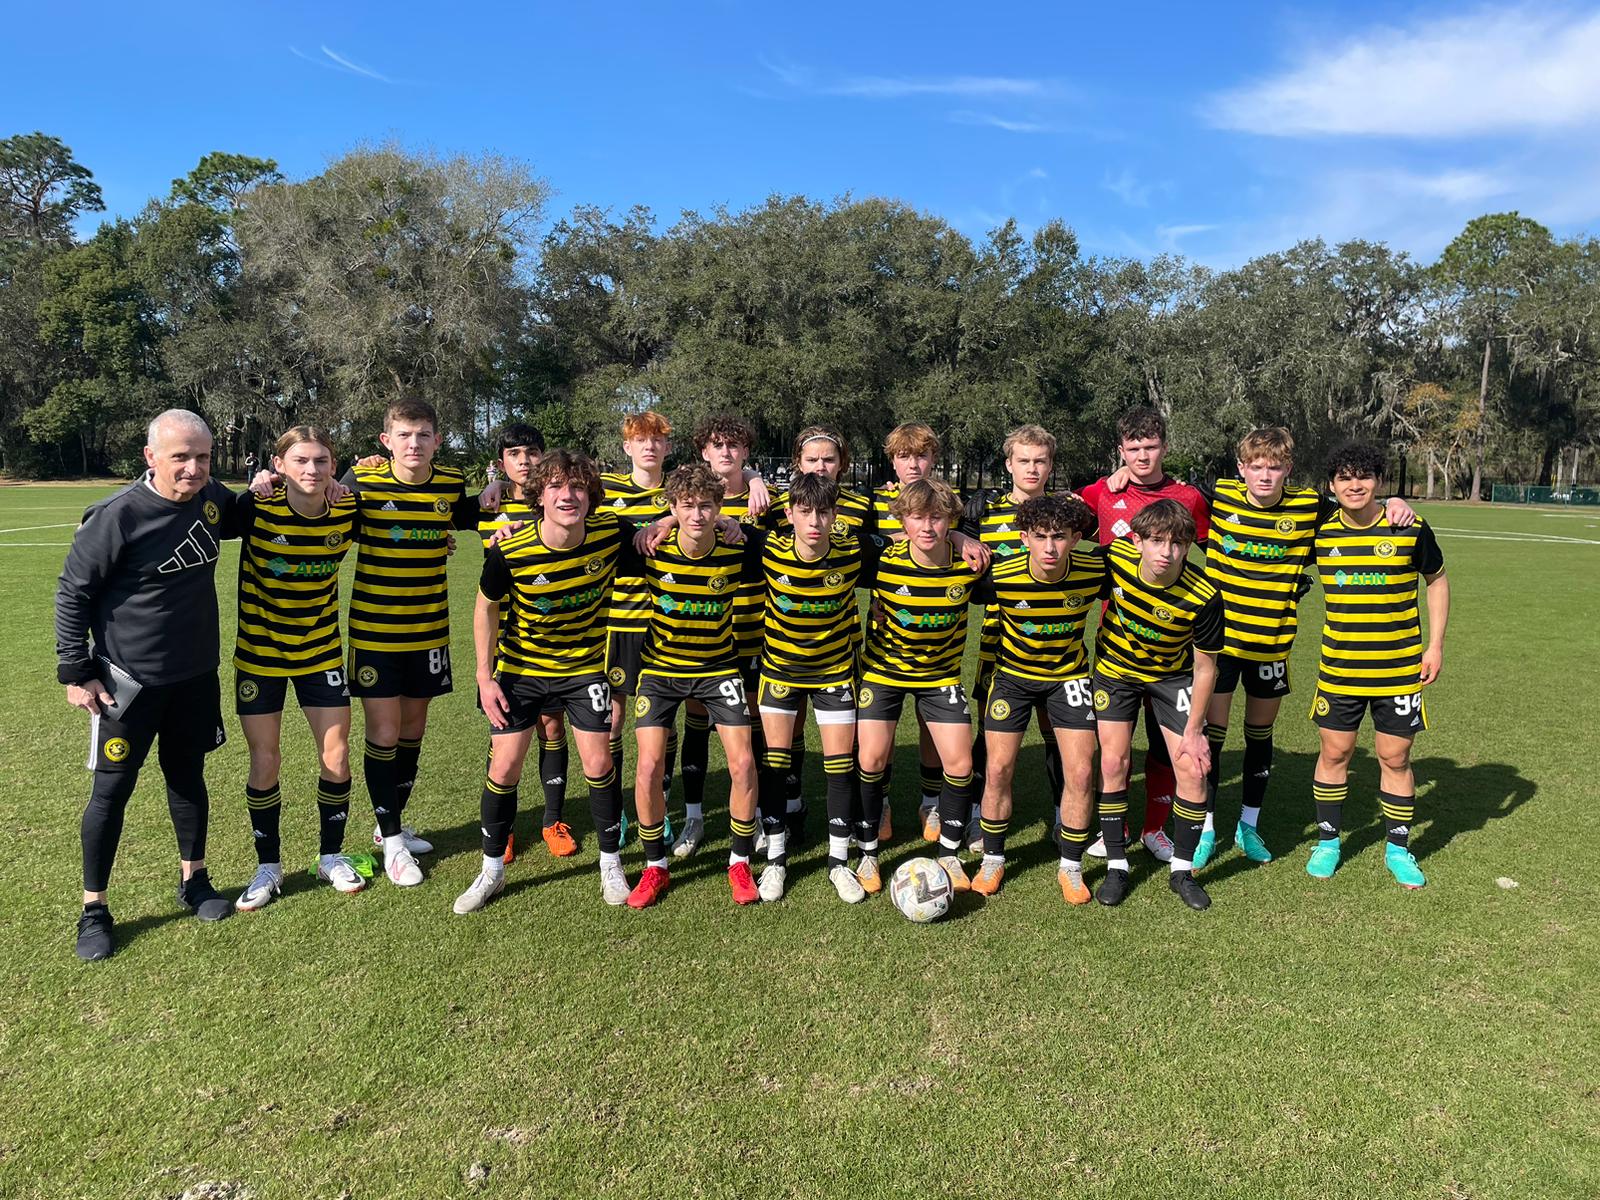 Academy boys take turn in Florida showcase featured image